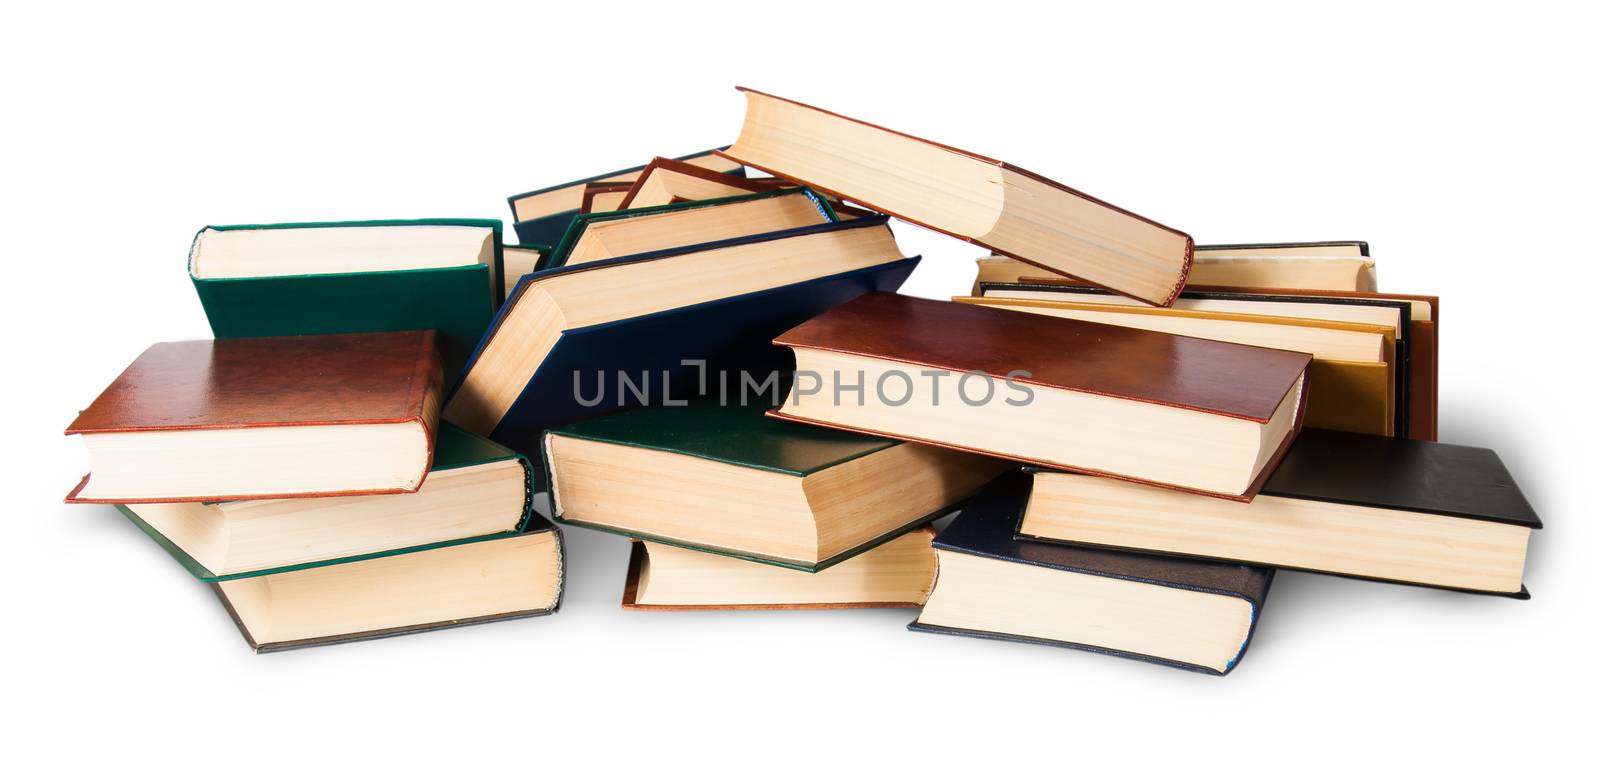 In front piled on a bunch of old books isolated on white background